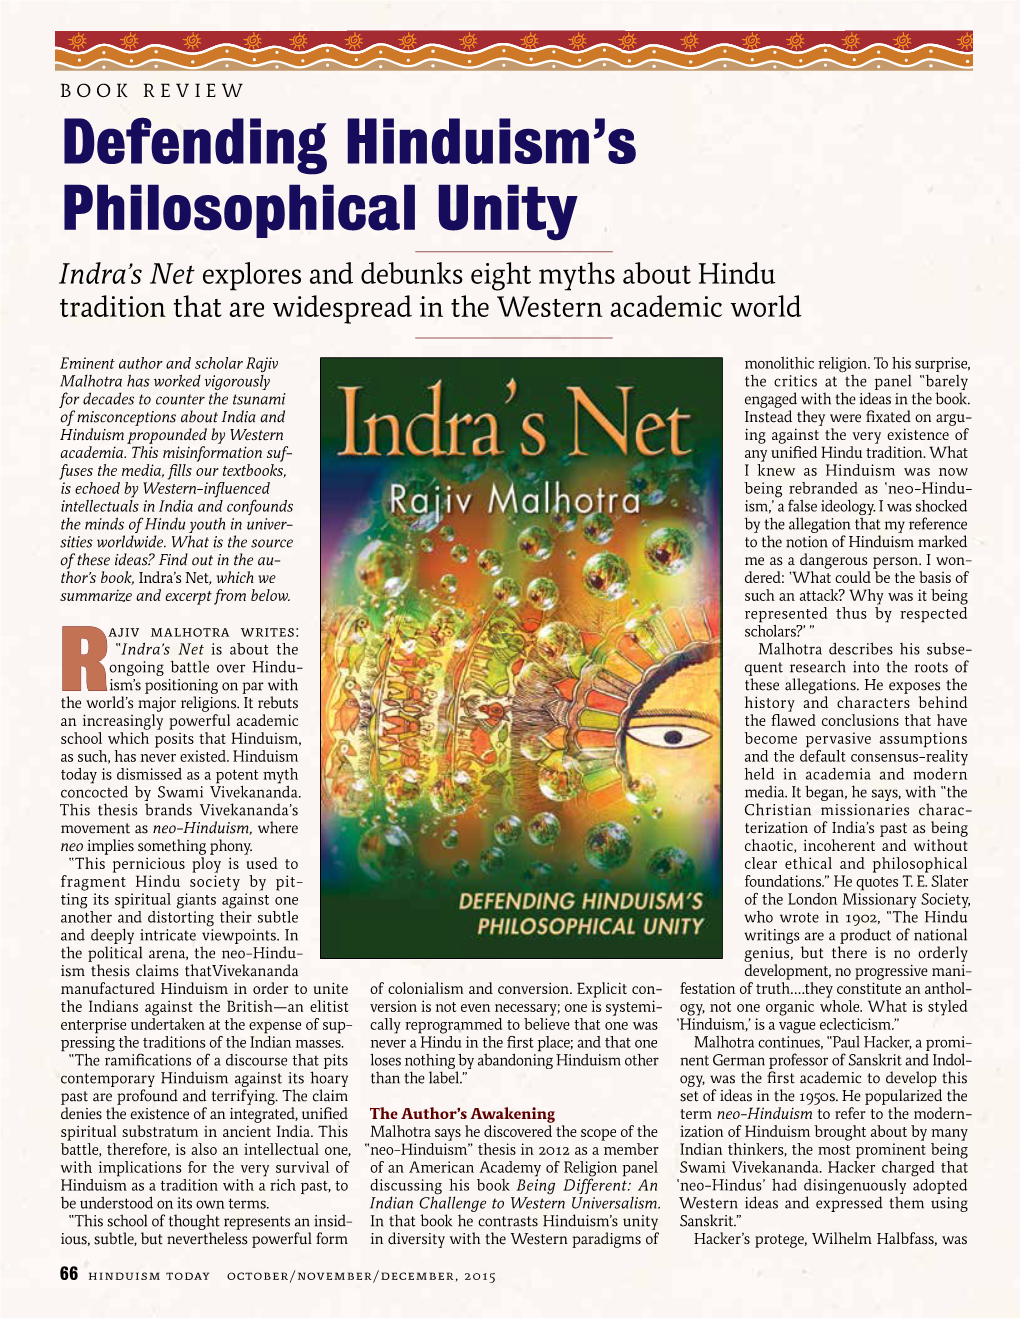 Defending Hinduism's Philosophical Unity